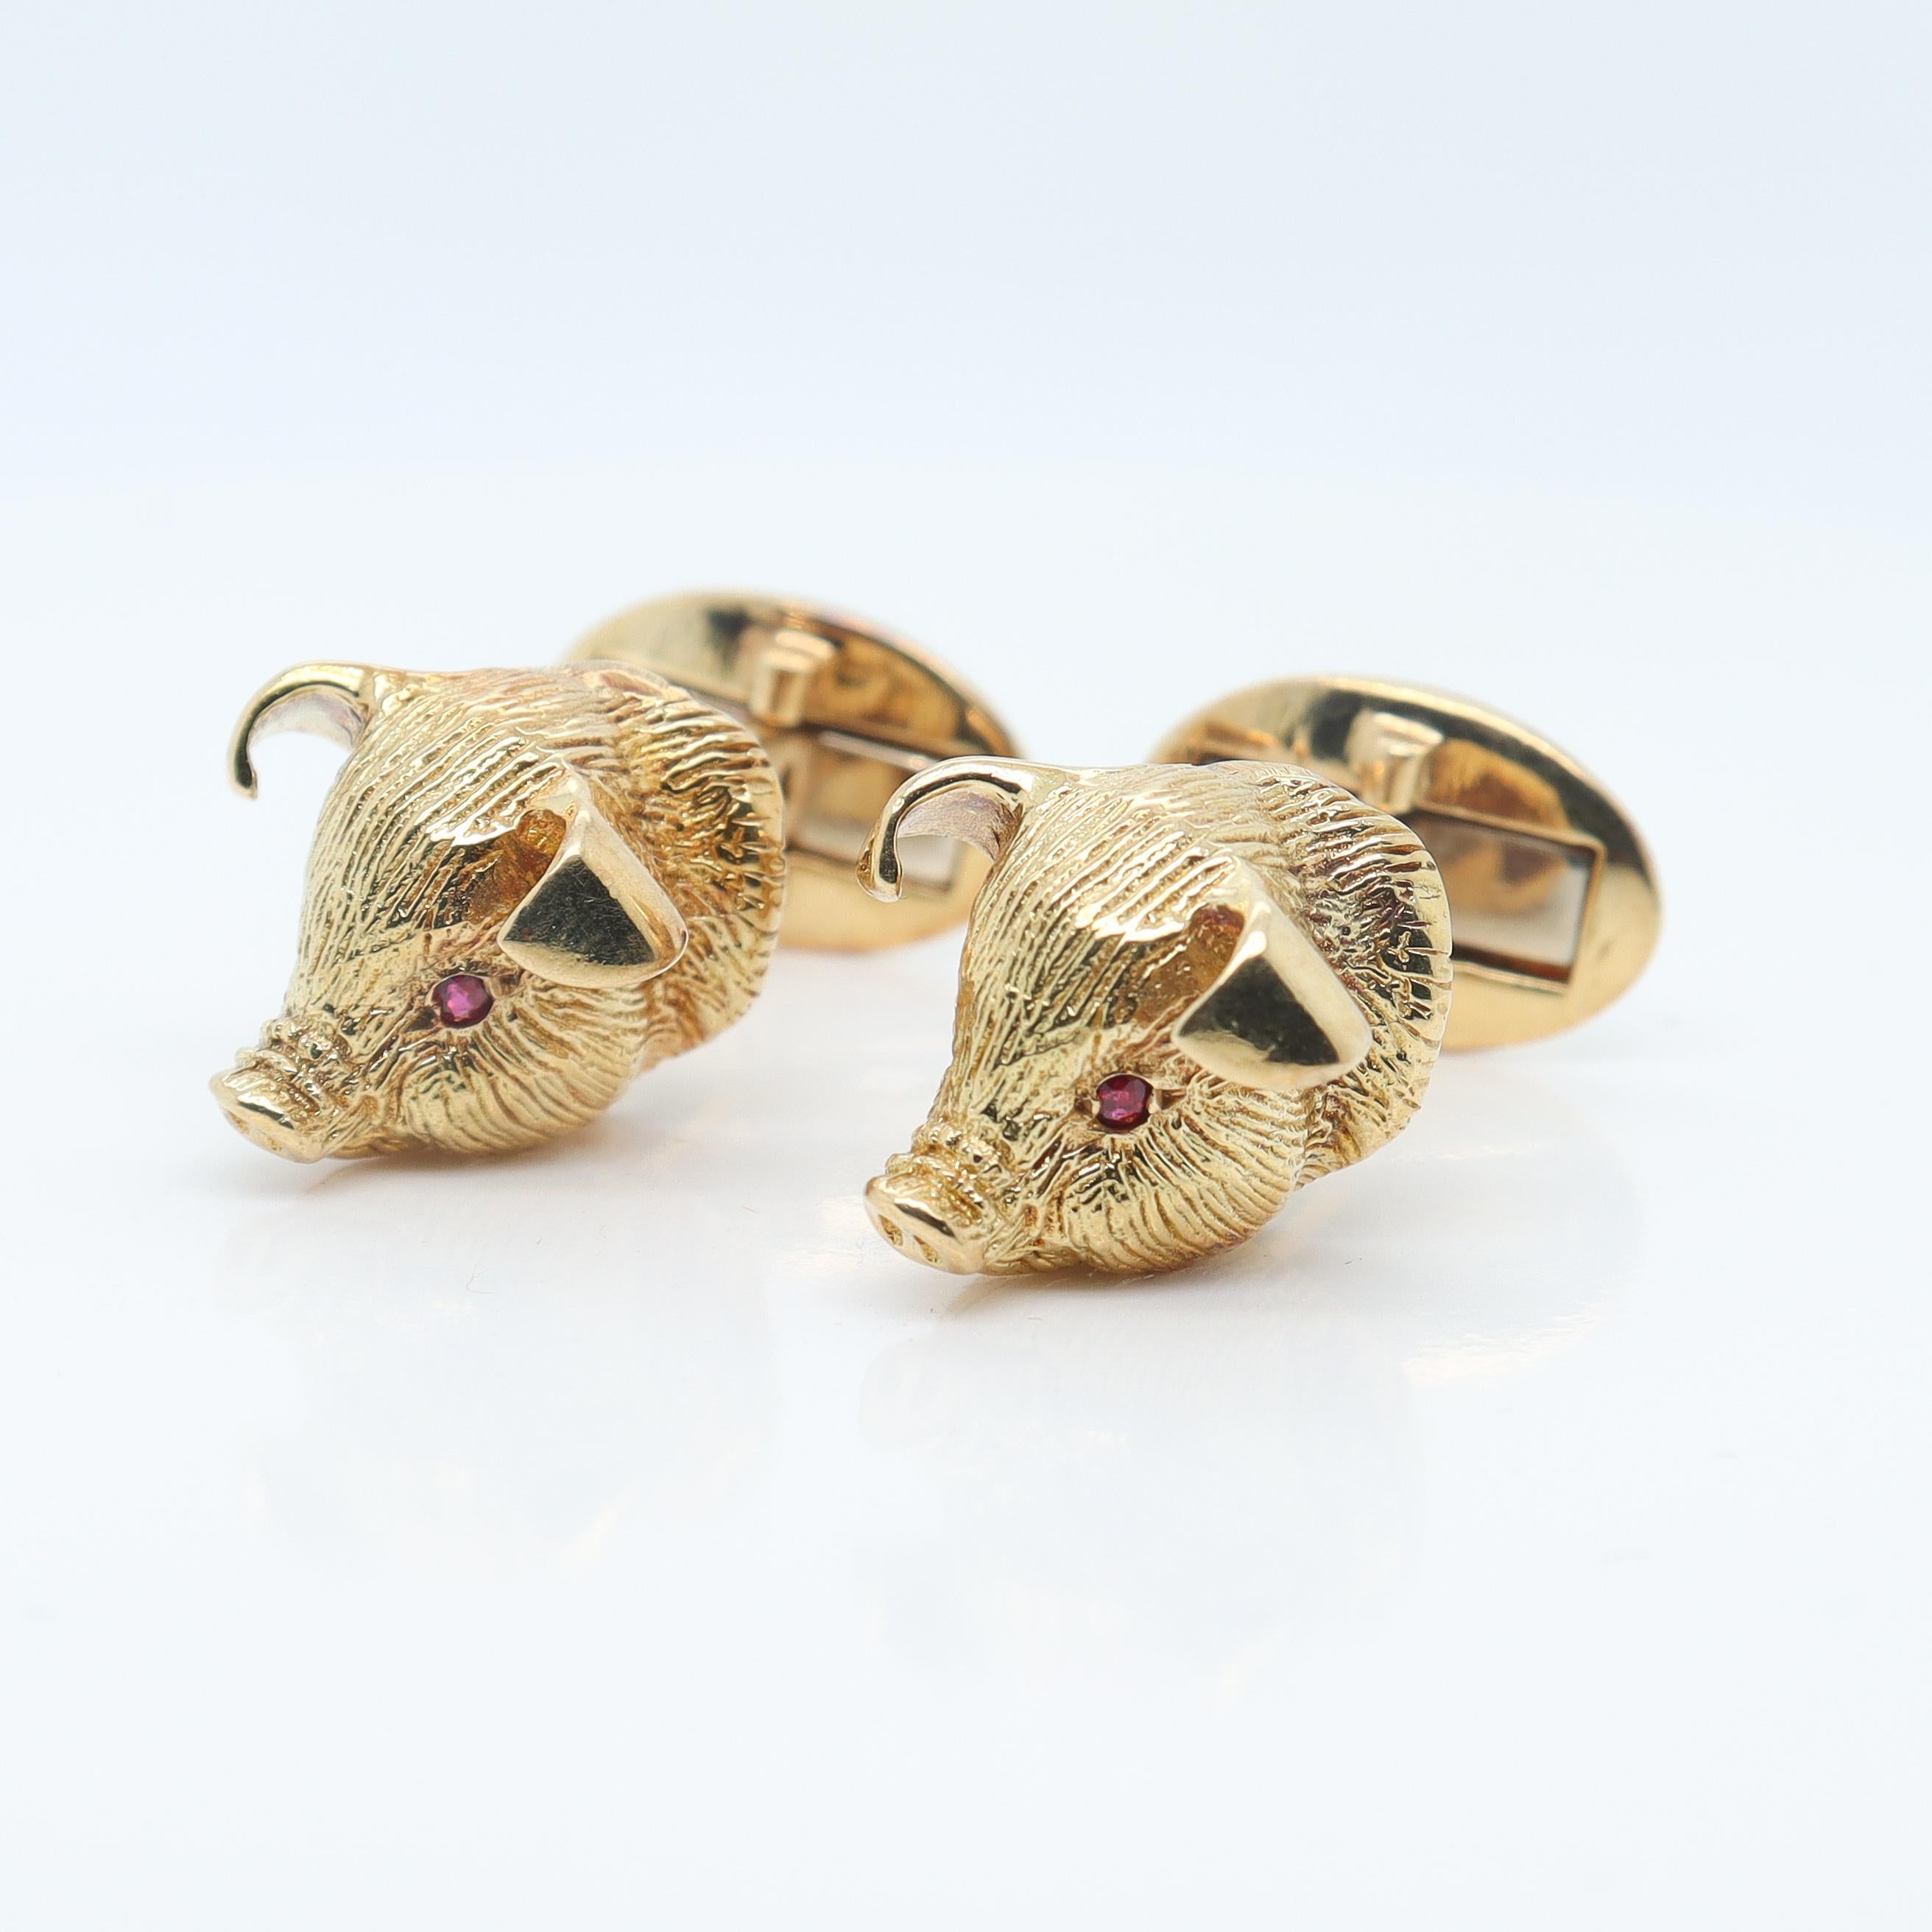 A fine pair of figural gold & ruby cufflinks.

By Craiger Drake.

In 18k gold.

Each in the shape of a pig or piglet's head.

With high polished ears, textured skin, and prong set ruby eyes.

Marked to the post 18k and with Craiger Drake's maker's